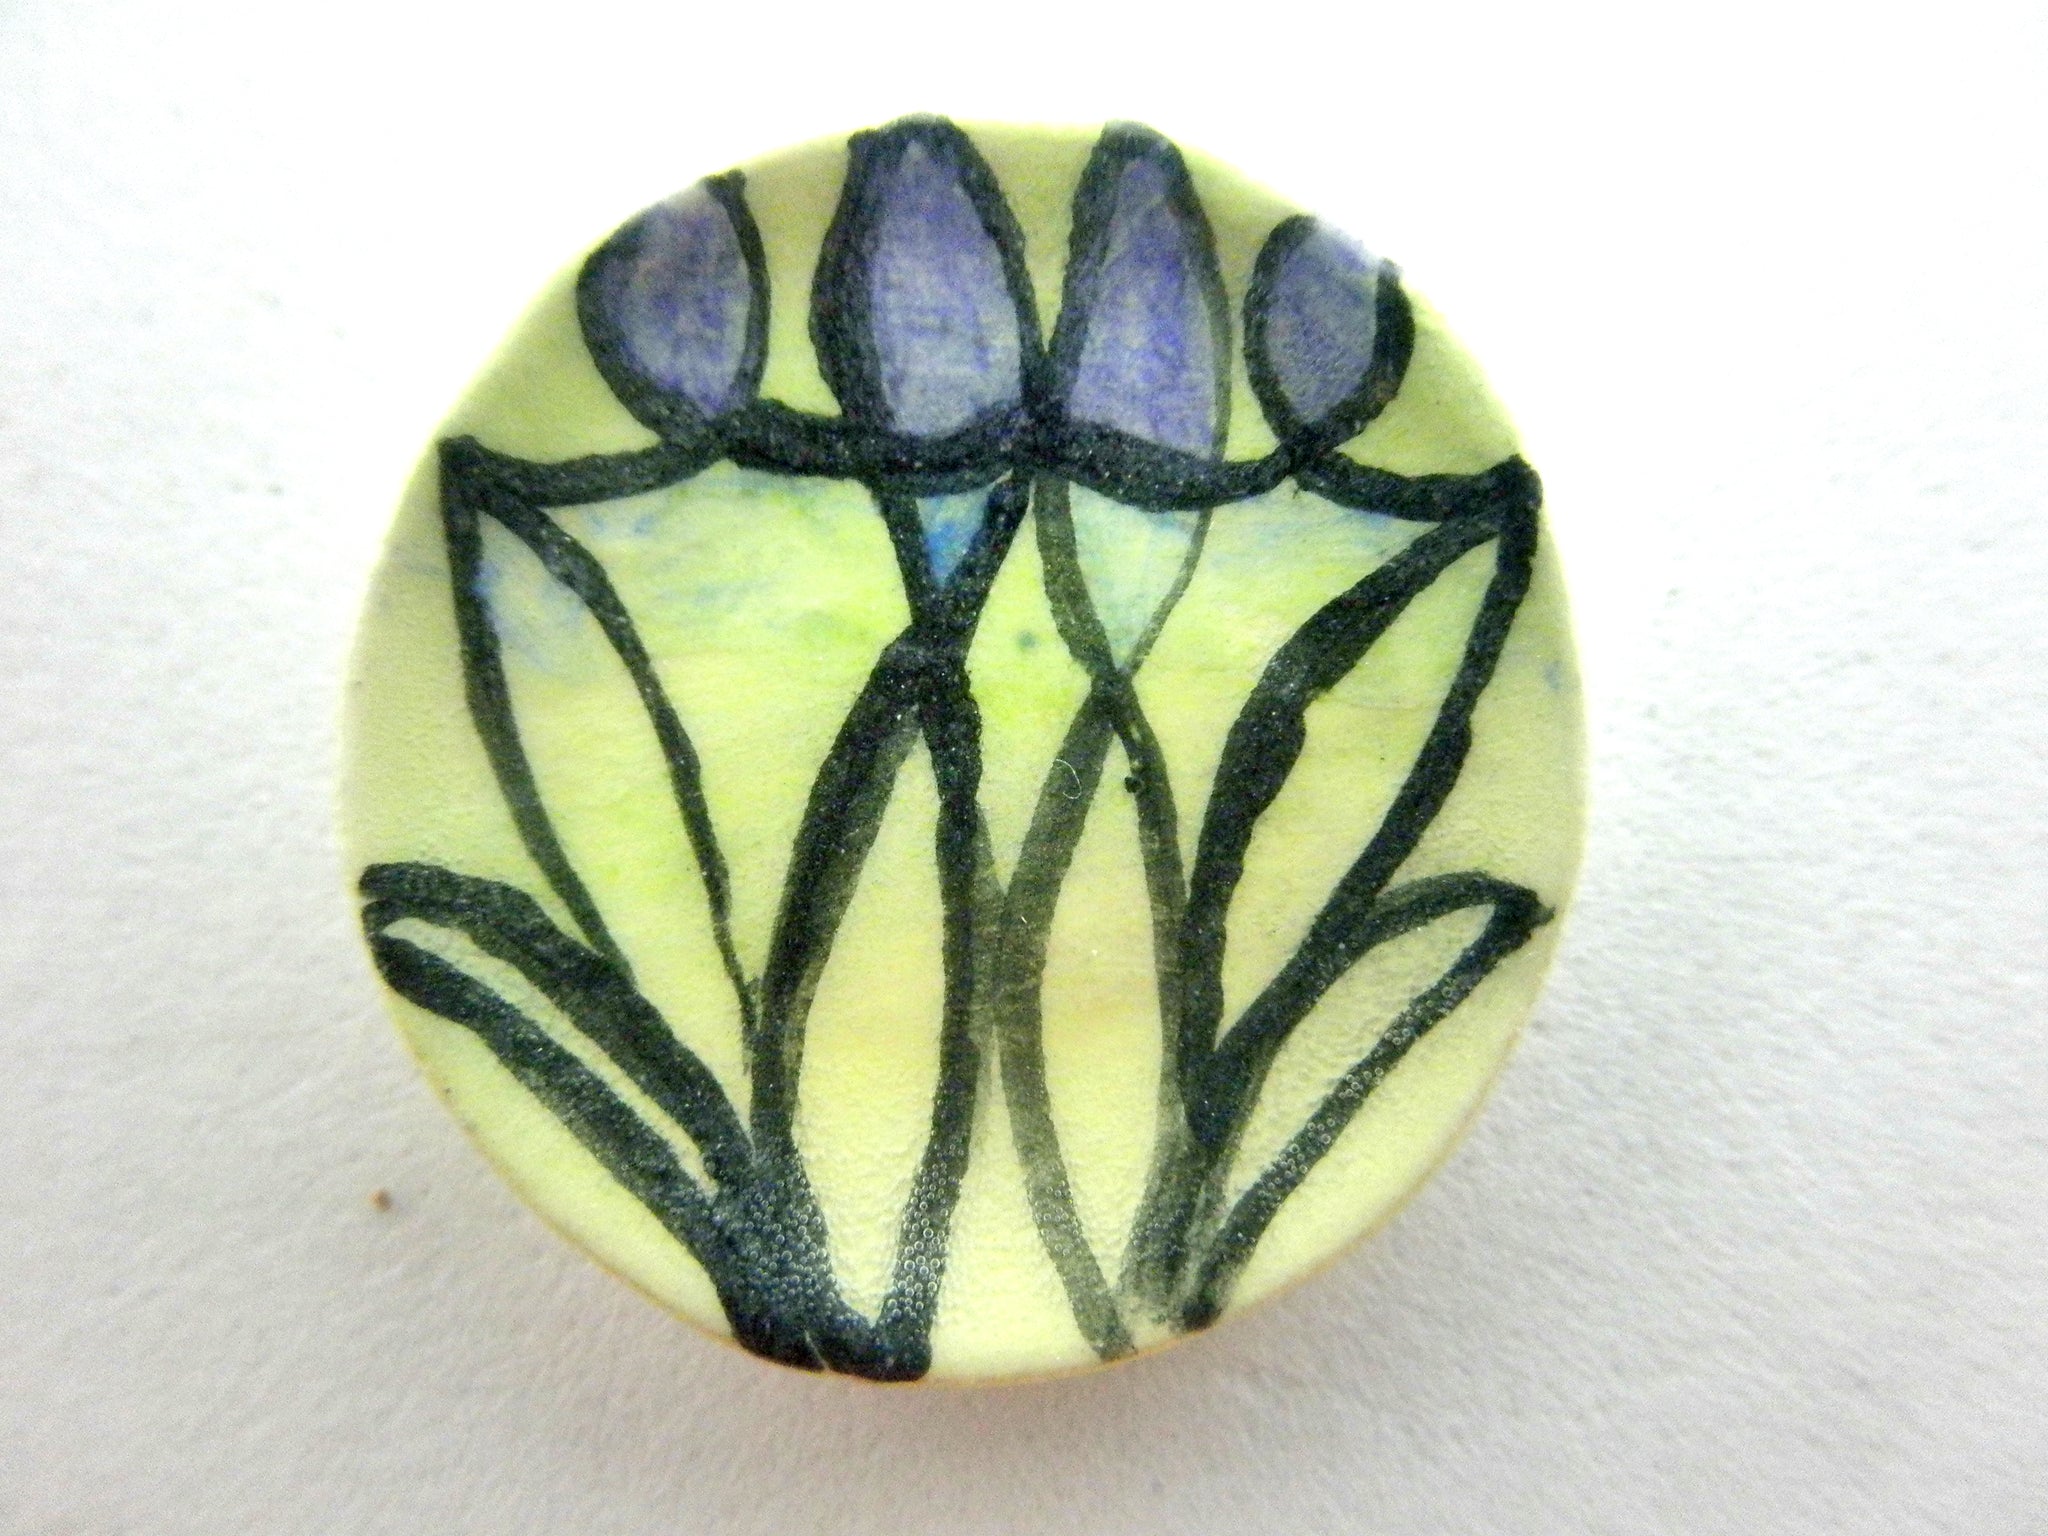 Miniature ceramic plate - stained glass look